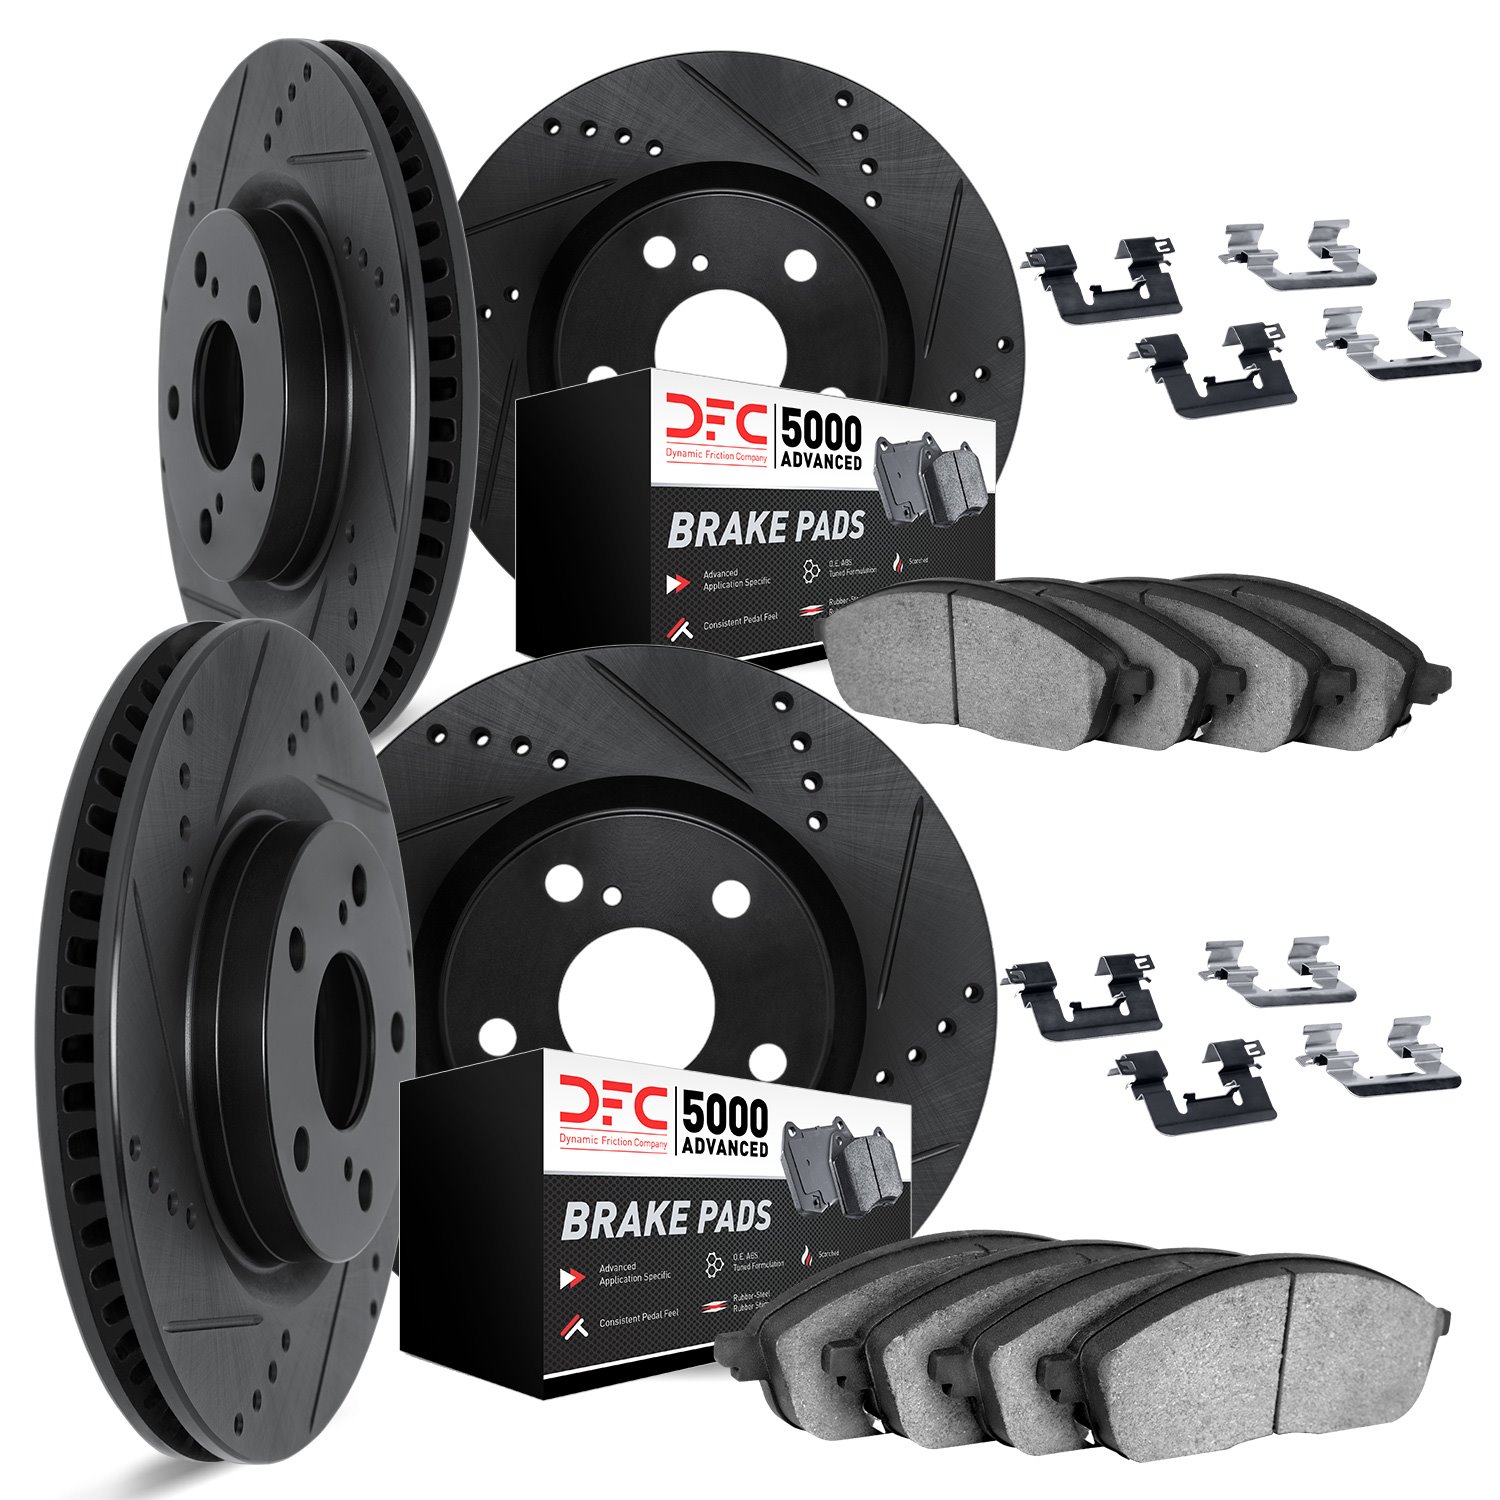 8514-31036 Drilled/Slotted Brake Rotors w/5000 Advanced Brake Pads Kit & Hardware [Black], 2012-2016 BMW, Position: Front and Re